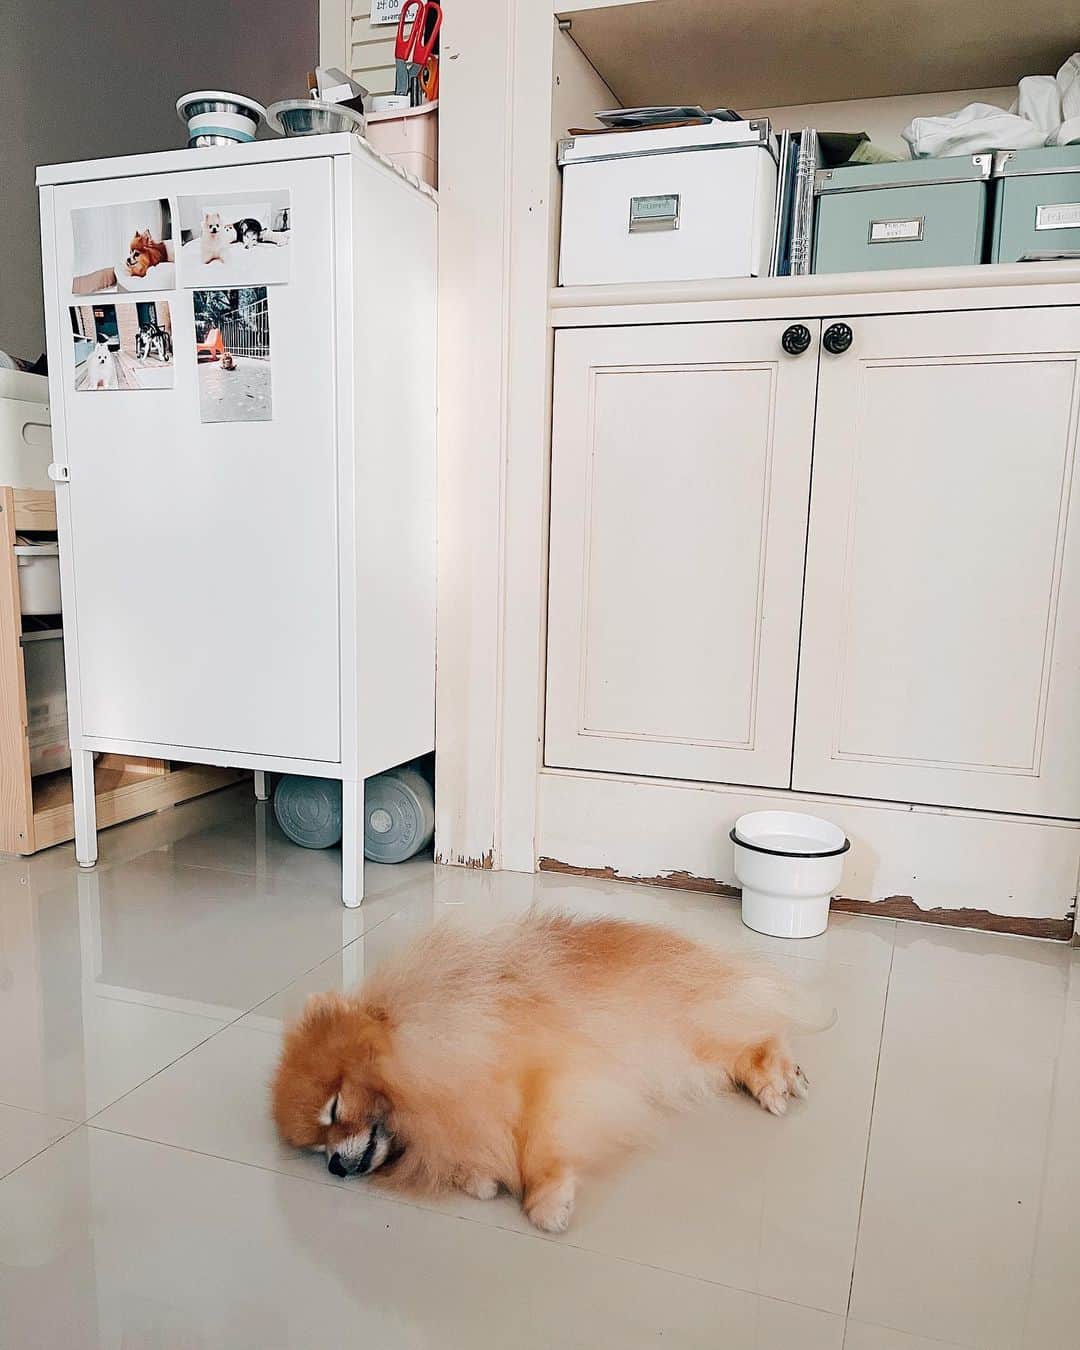 r_oseのインスタグラム：「Been super tired🦁〰️...... the care taker said she insisted to stand and check every passing thru human at the vet.... like let me check, next one must be mom picking me home, she just keep waiting🥺#noplacelikehome  Casey admitted due to the pulmonary edema from her heart disease. She took all the meds but the symptoms keep coming back in a few days after we off an antibiotics.  It makes me in doubt but finally the vet just found out the cause of it. Her fast heart rate that exceed 200 beats per mins even  in normal circumstances are the cause. When the heart beats excessively or rapidly, the heart pumps less efficiently and left some fluid in the lungs.」